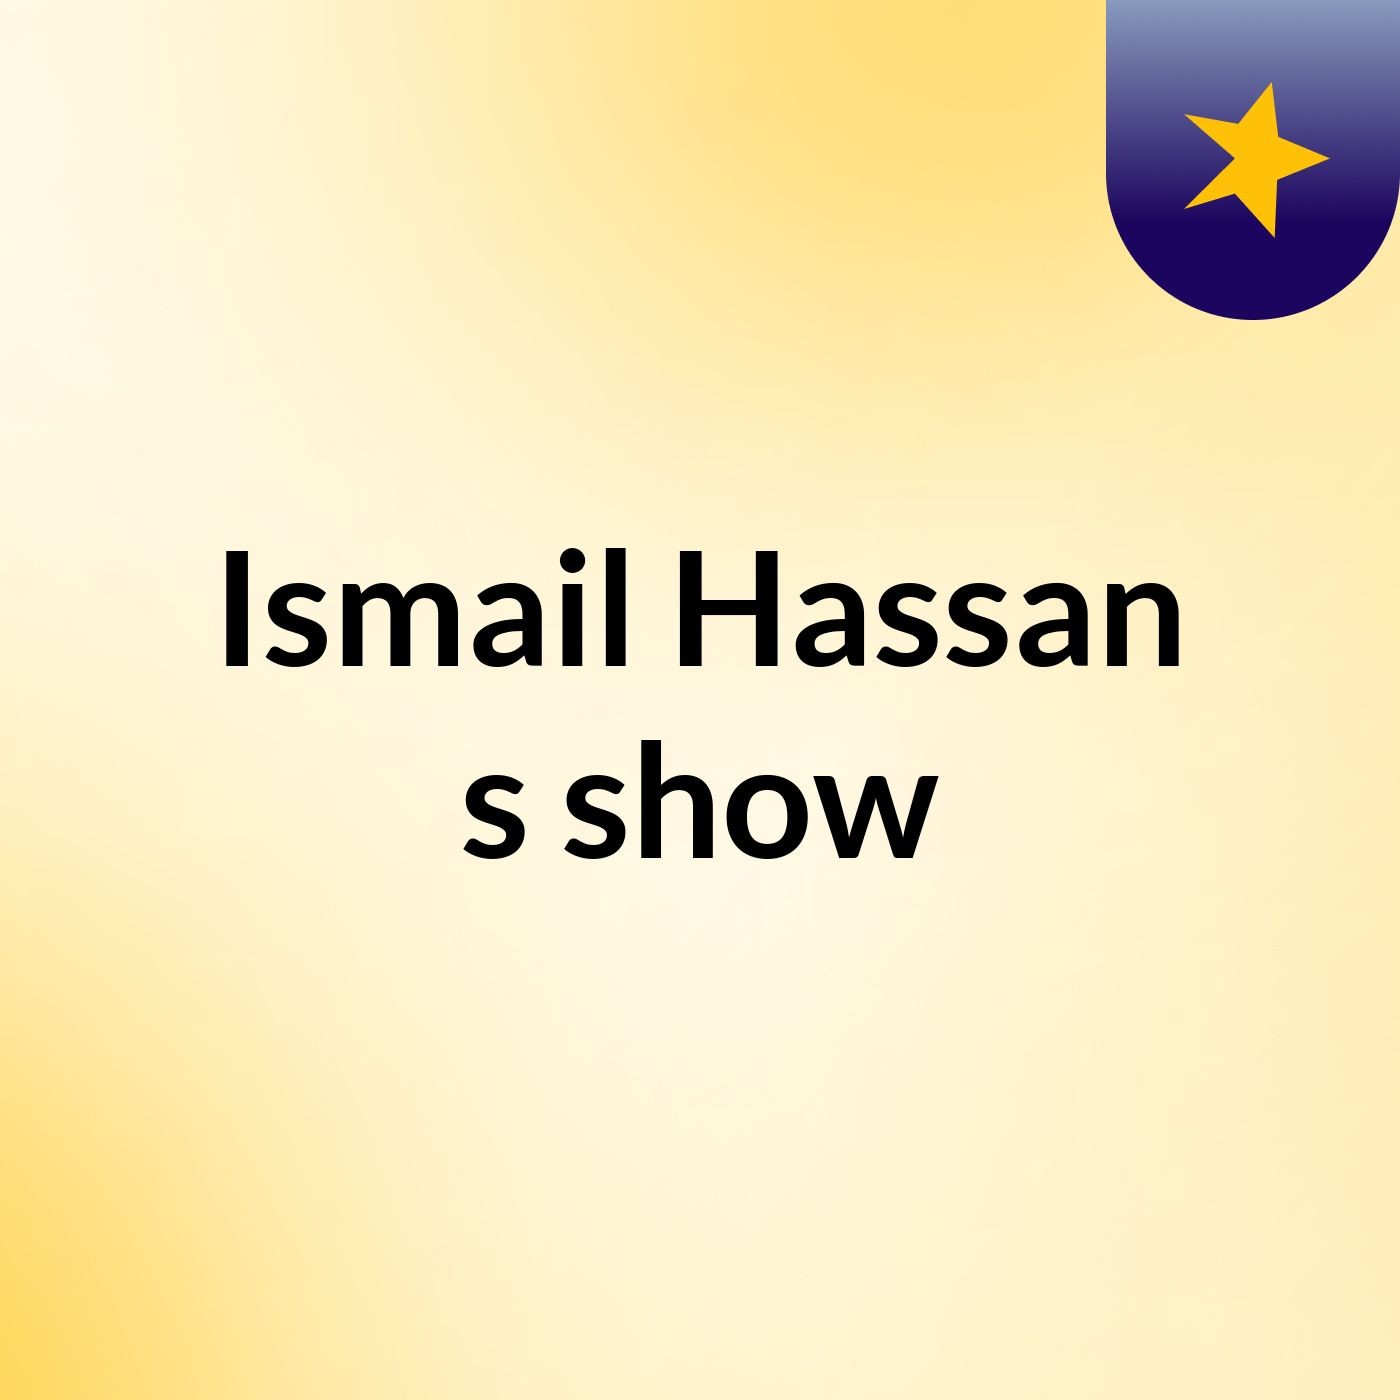 Ismail Hassan's show